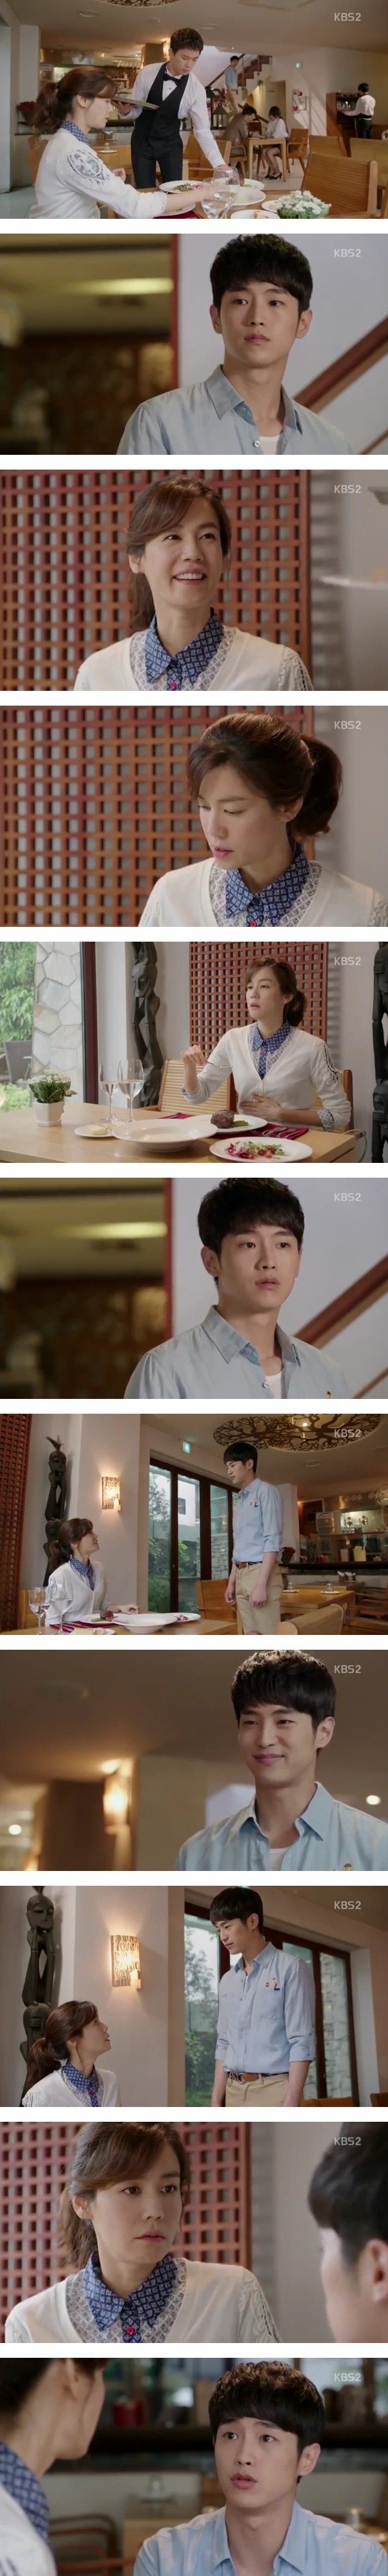 episodes 31 and 32 captures for the Korean drama 'Very Good Times'